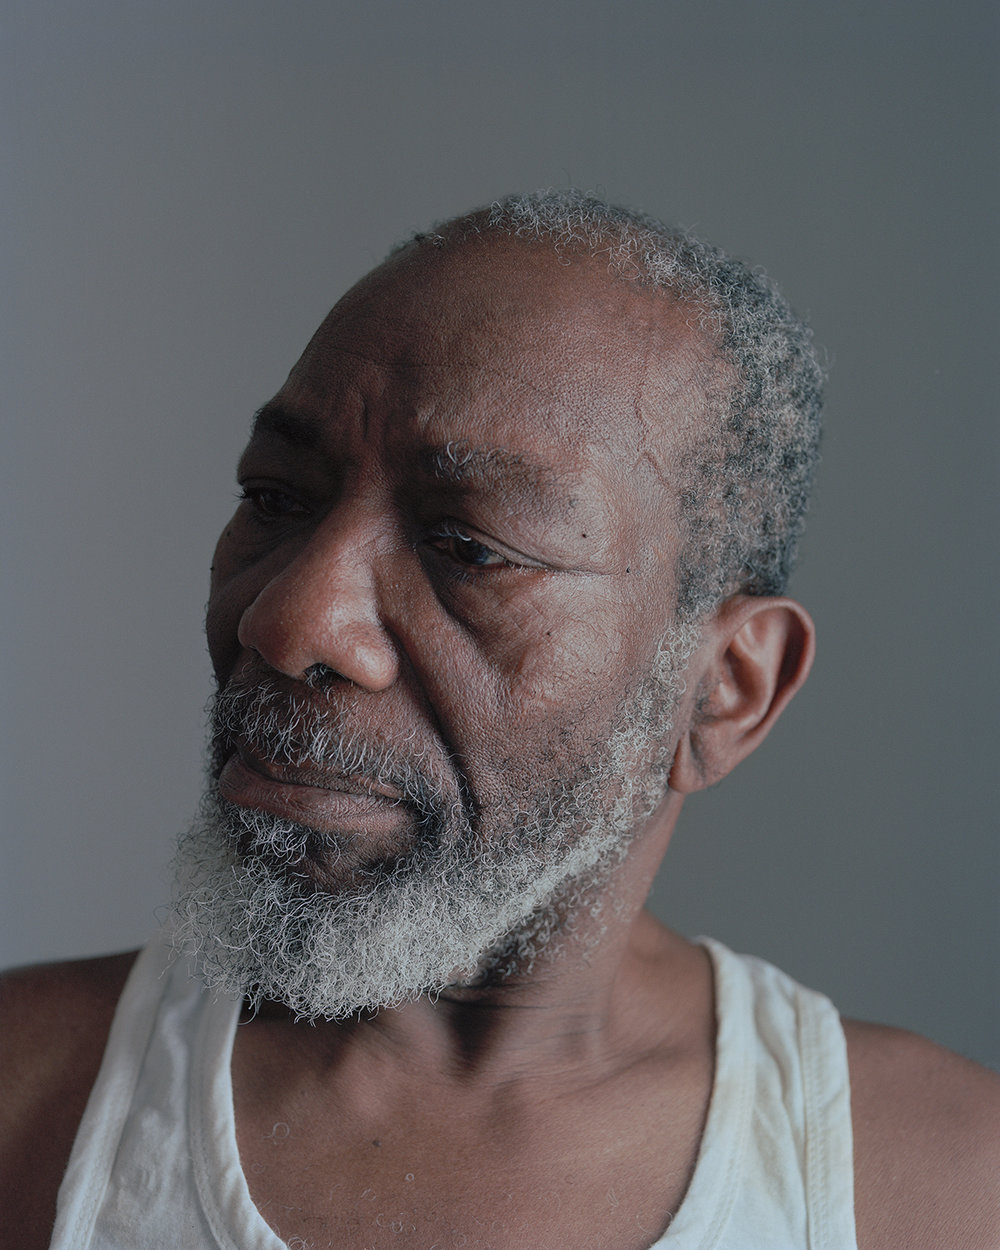 Johnson Baptiste, 80 years old, emigrated from the Commonwealth of Dominica in 1961 and spent 26 years working at Gedling and Ollerton Collieries